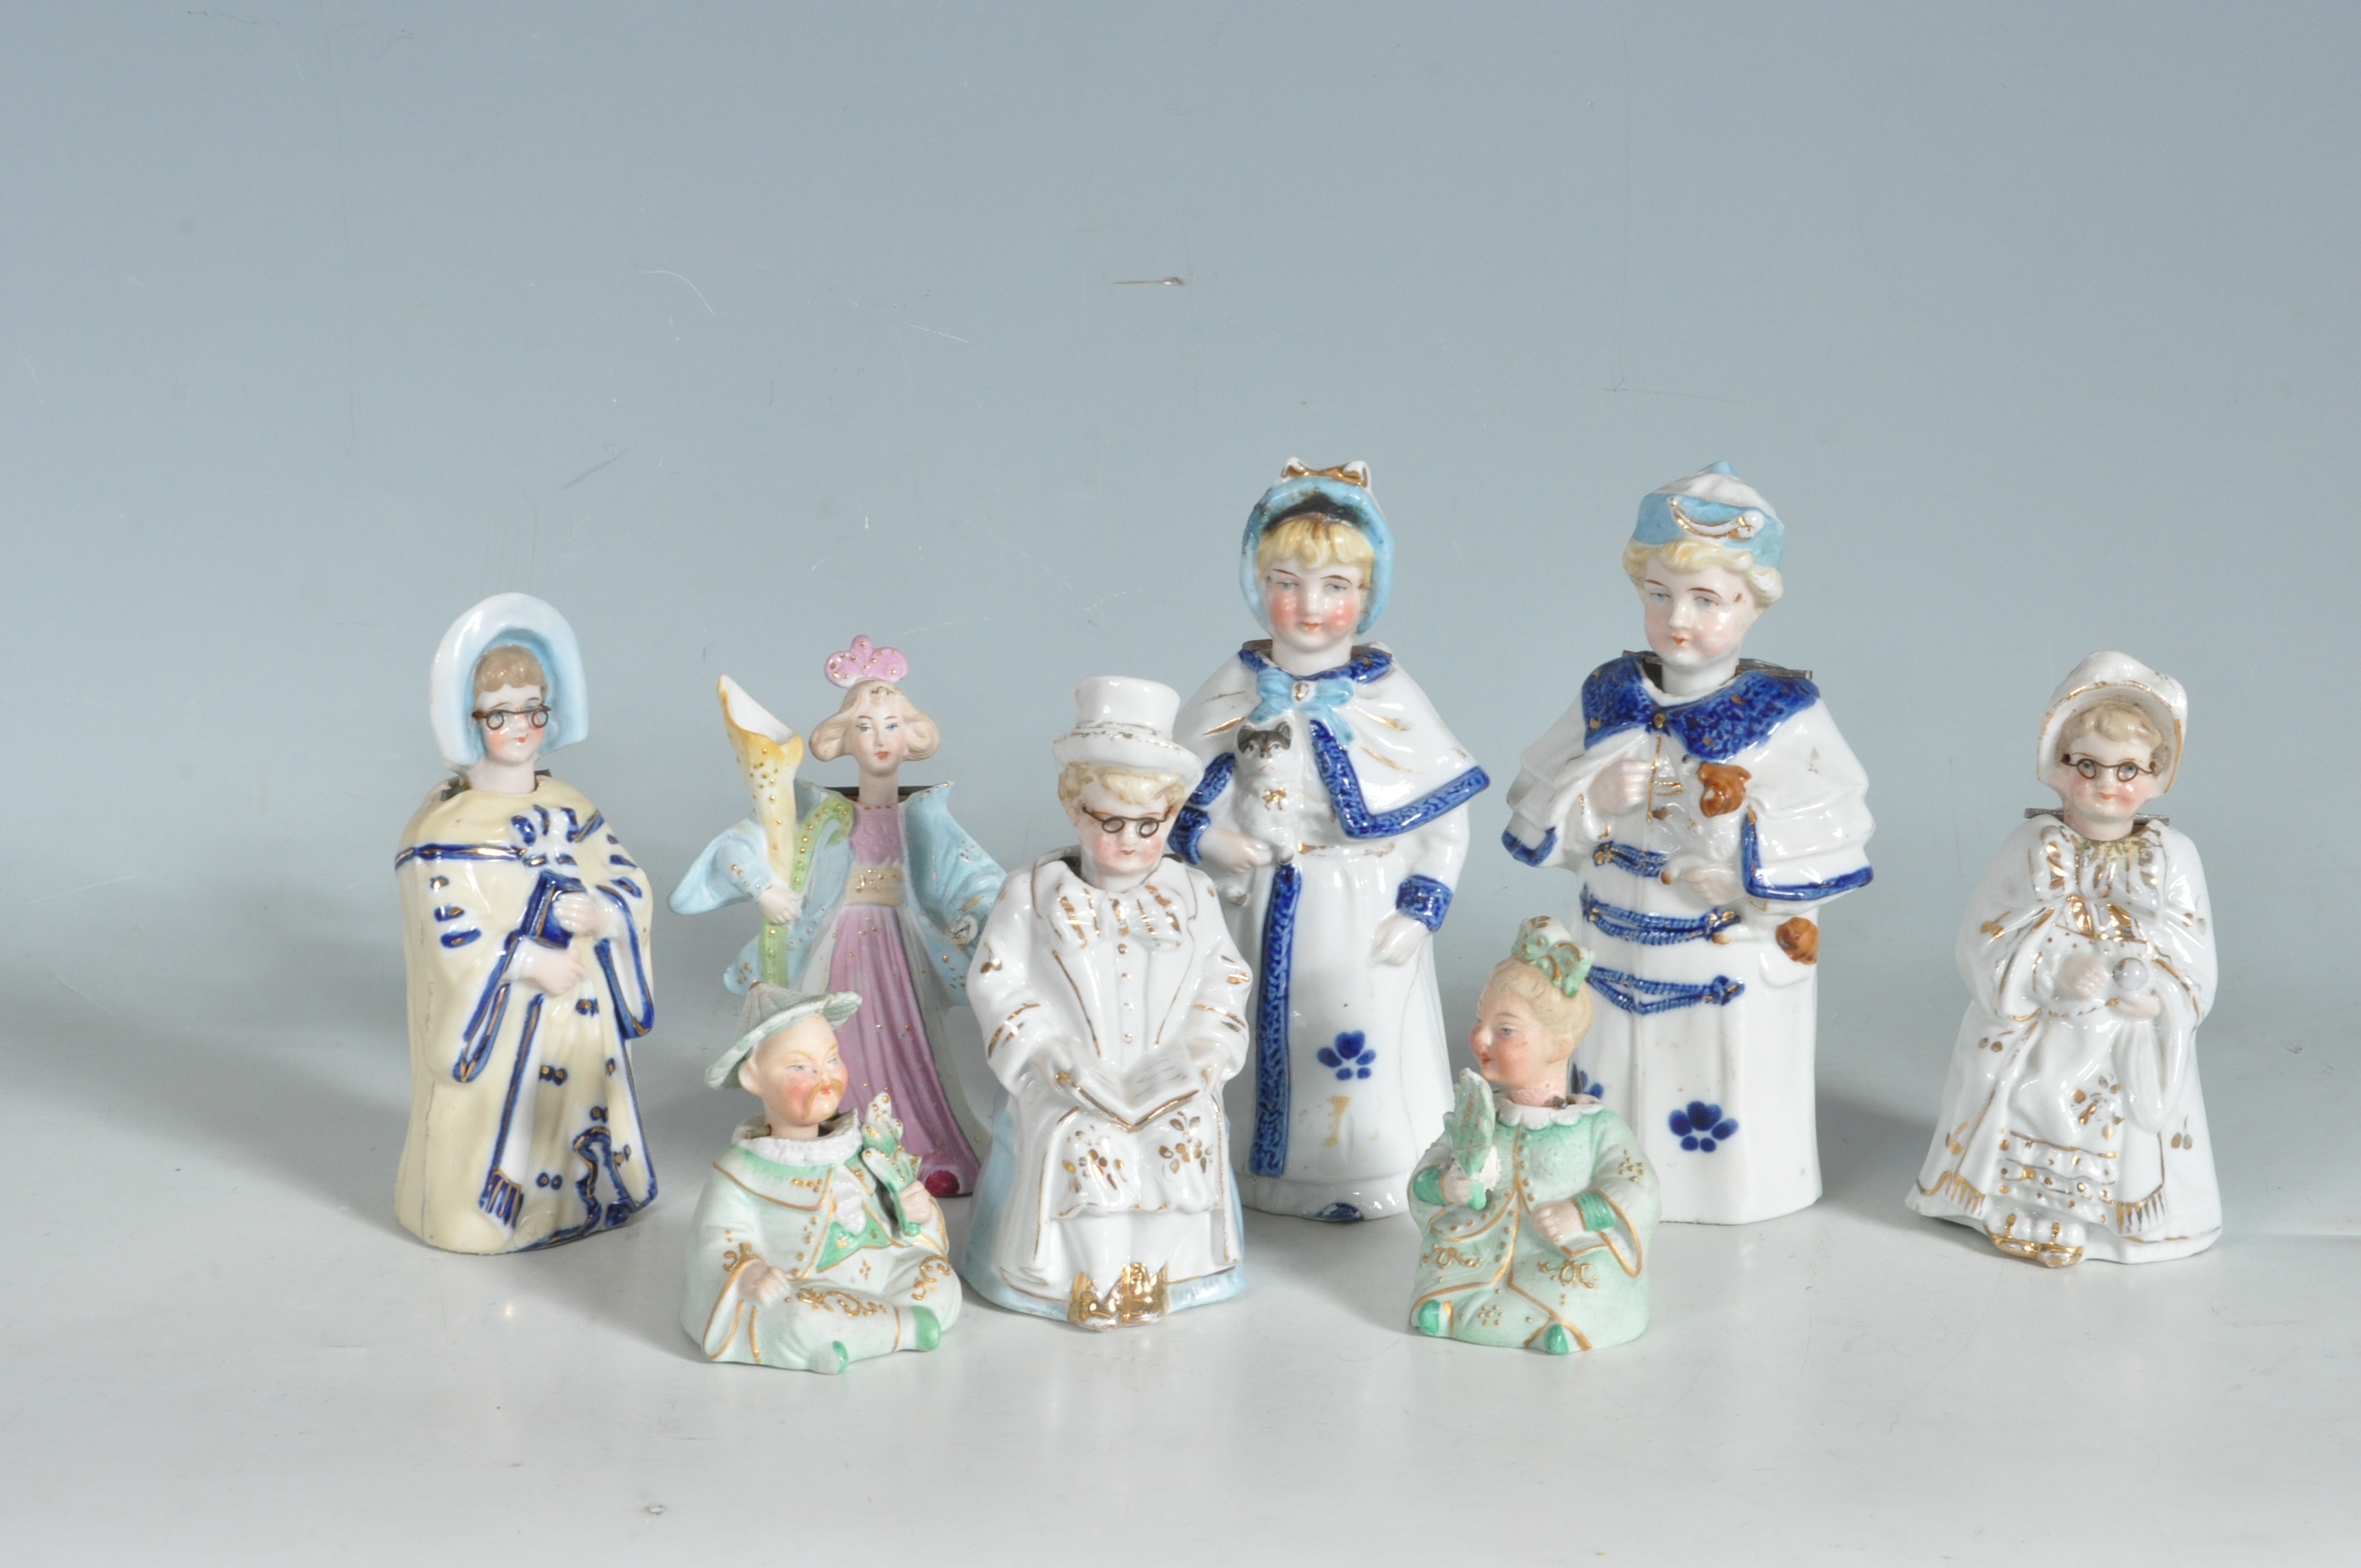 COLLECTION OF LATE 19TH EARLY 20TH CENTURY NODDER FIGURINES